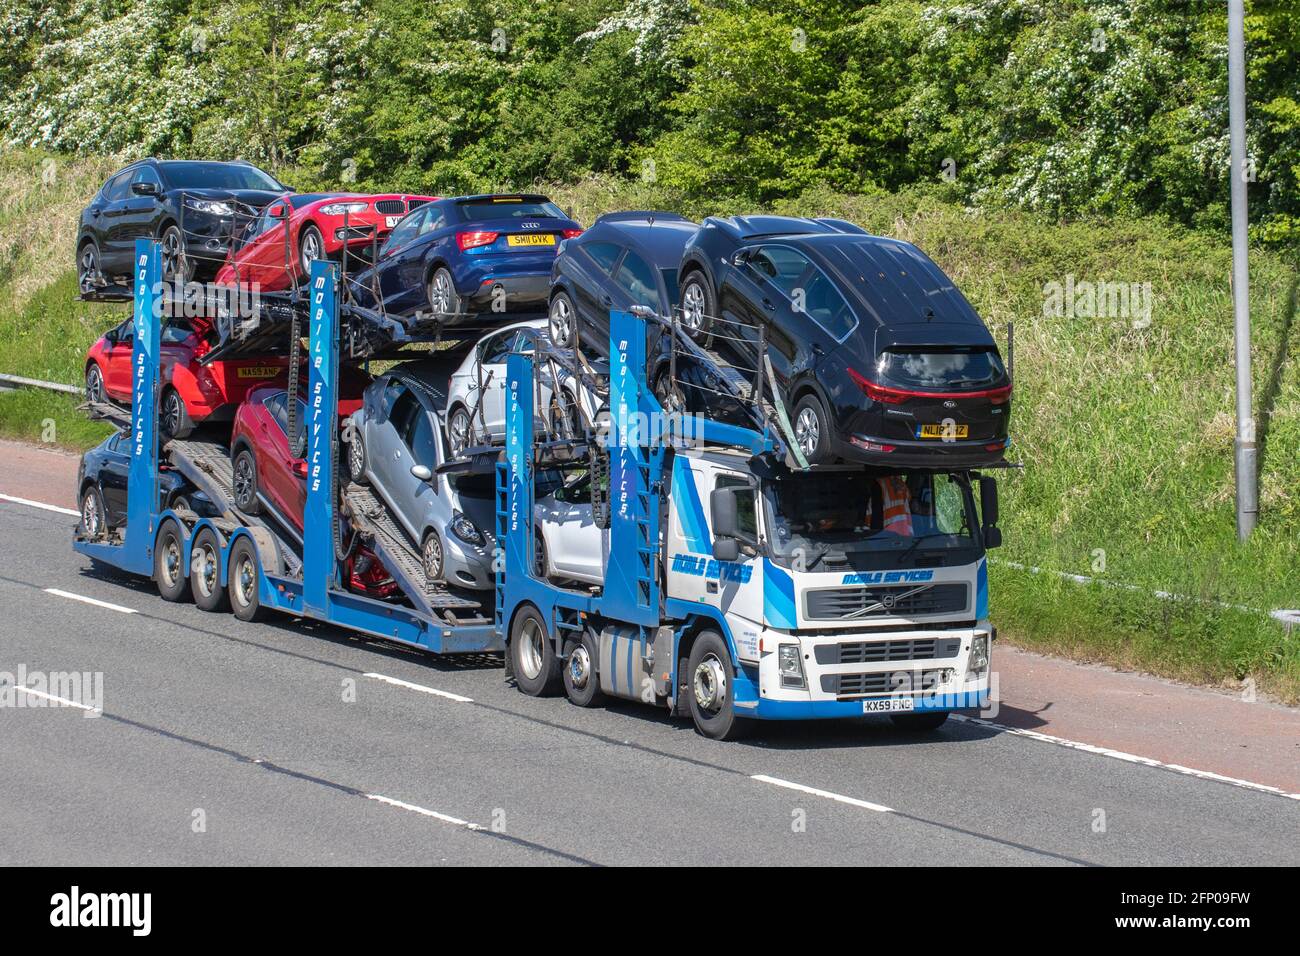 Mobile Services Auto transporter, car transporter carrier; Motorway heavy bulk Haulage delivery trucks, haulage, lorry, transportation, collection and deliveries, multi-car commercial vehicle carrier, truck, special cargo, vehicle, delivery, transport, industry, freight on the M6 motorway. Stock Photo